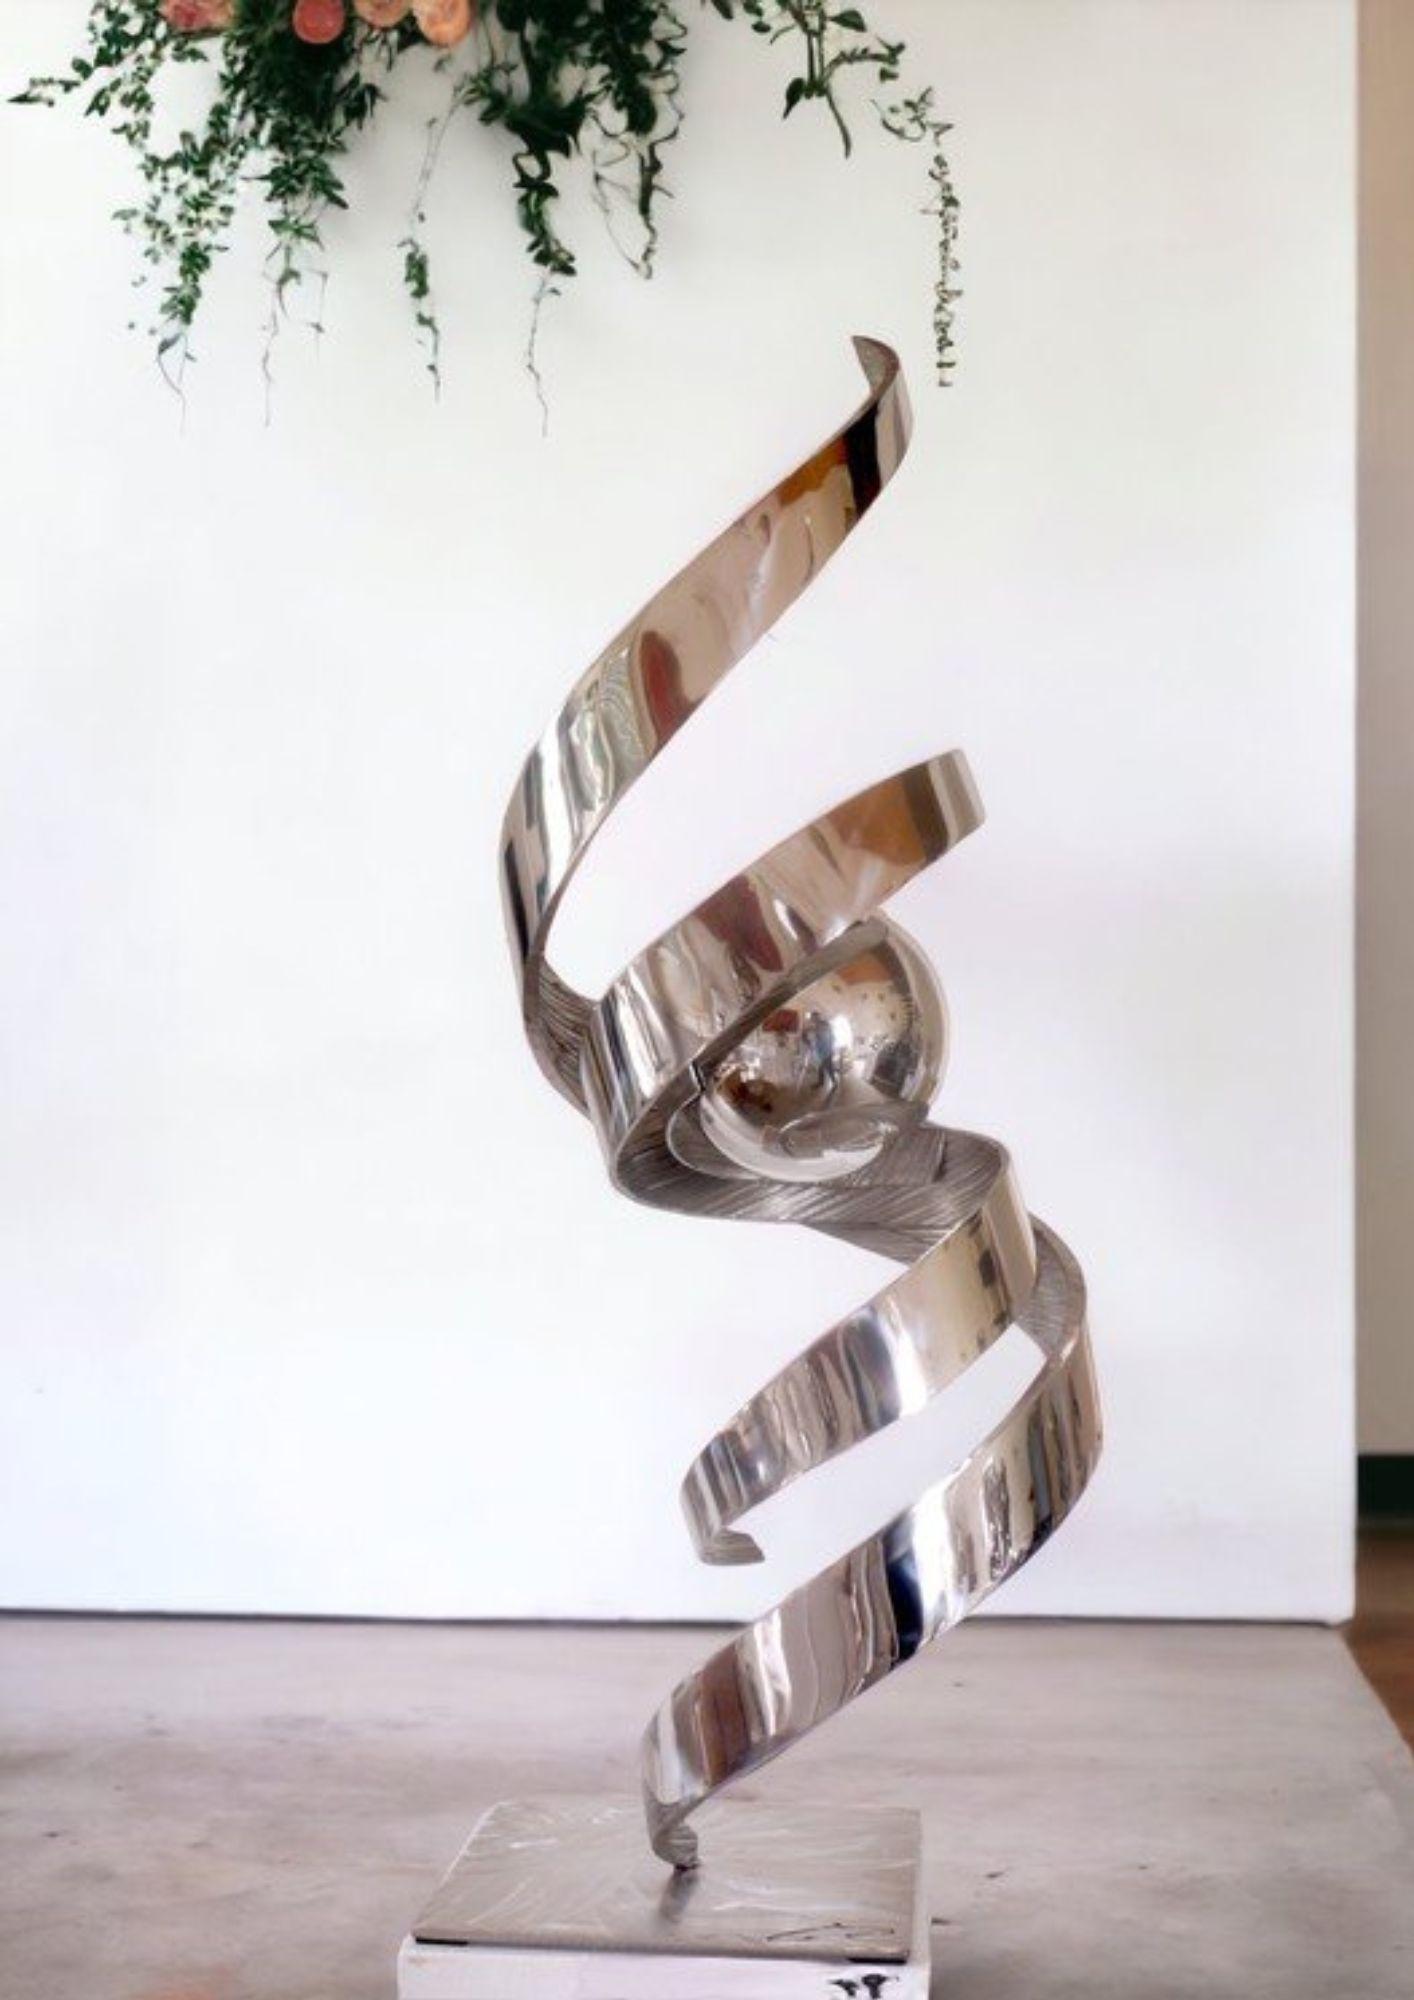 This “Storm” sculpture captures the turbulent dynamics of the raging wind. Through these polished curves and deep cuts, it expresses the strength of the elements and the points of balance between matter and space. The graceful and swirling curves